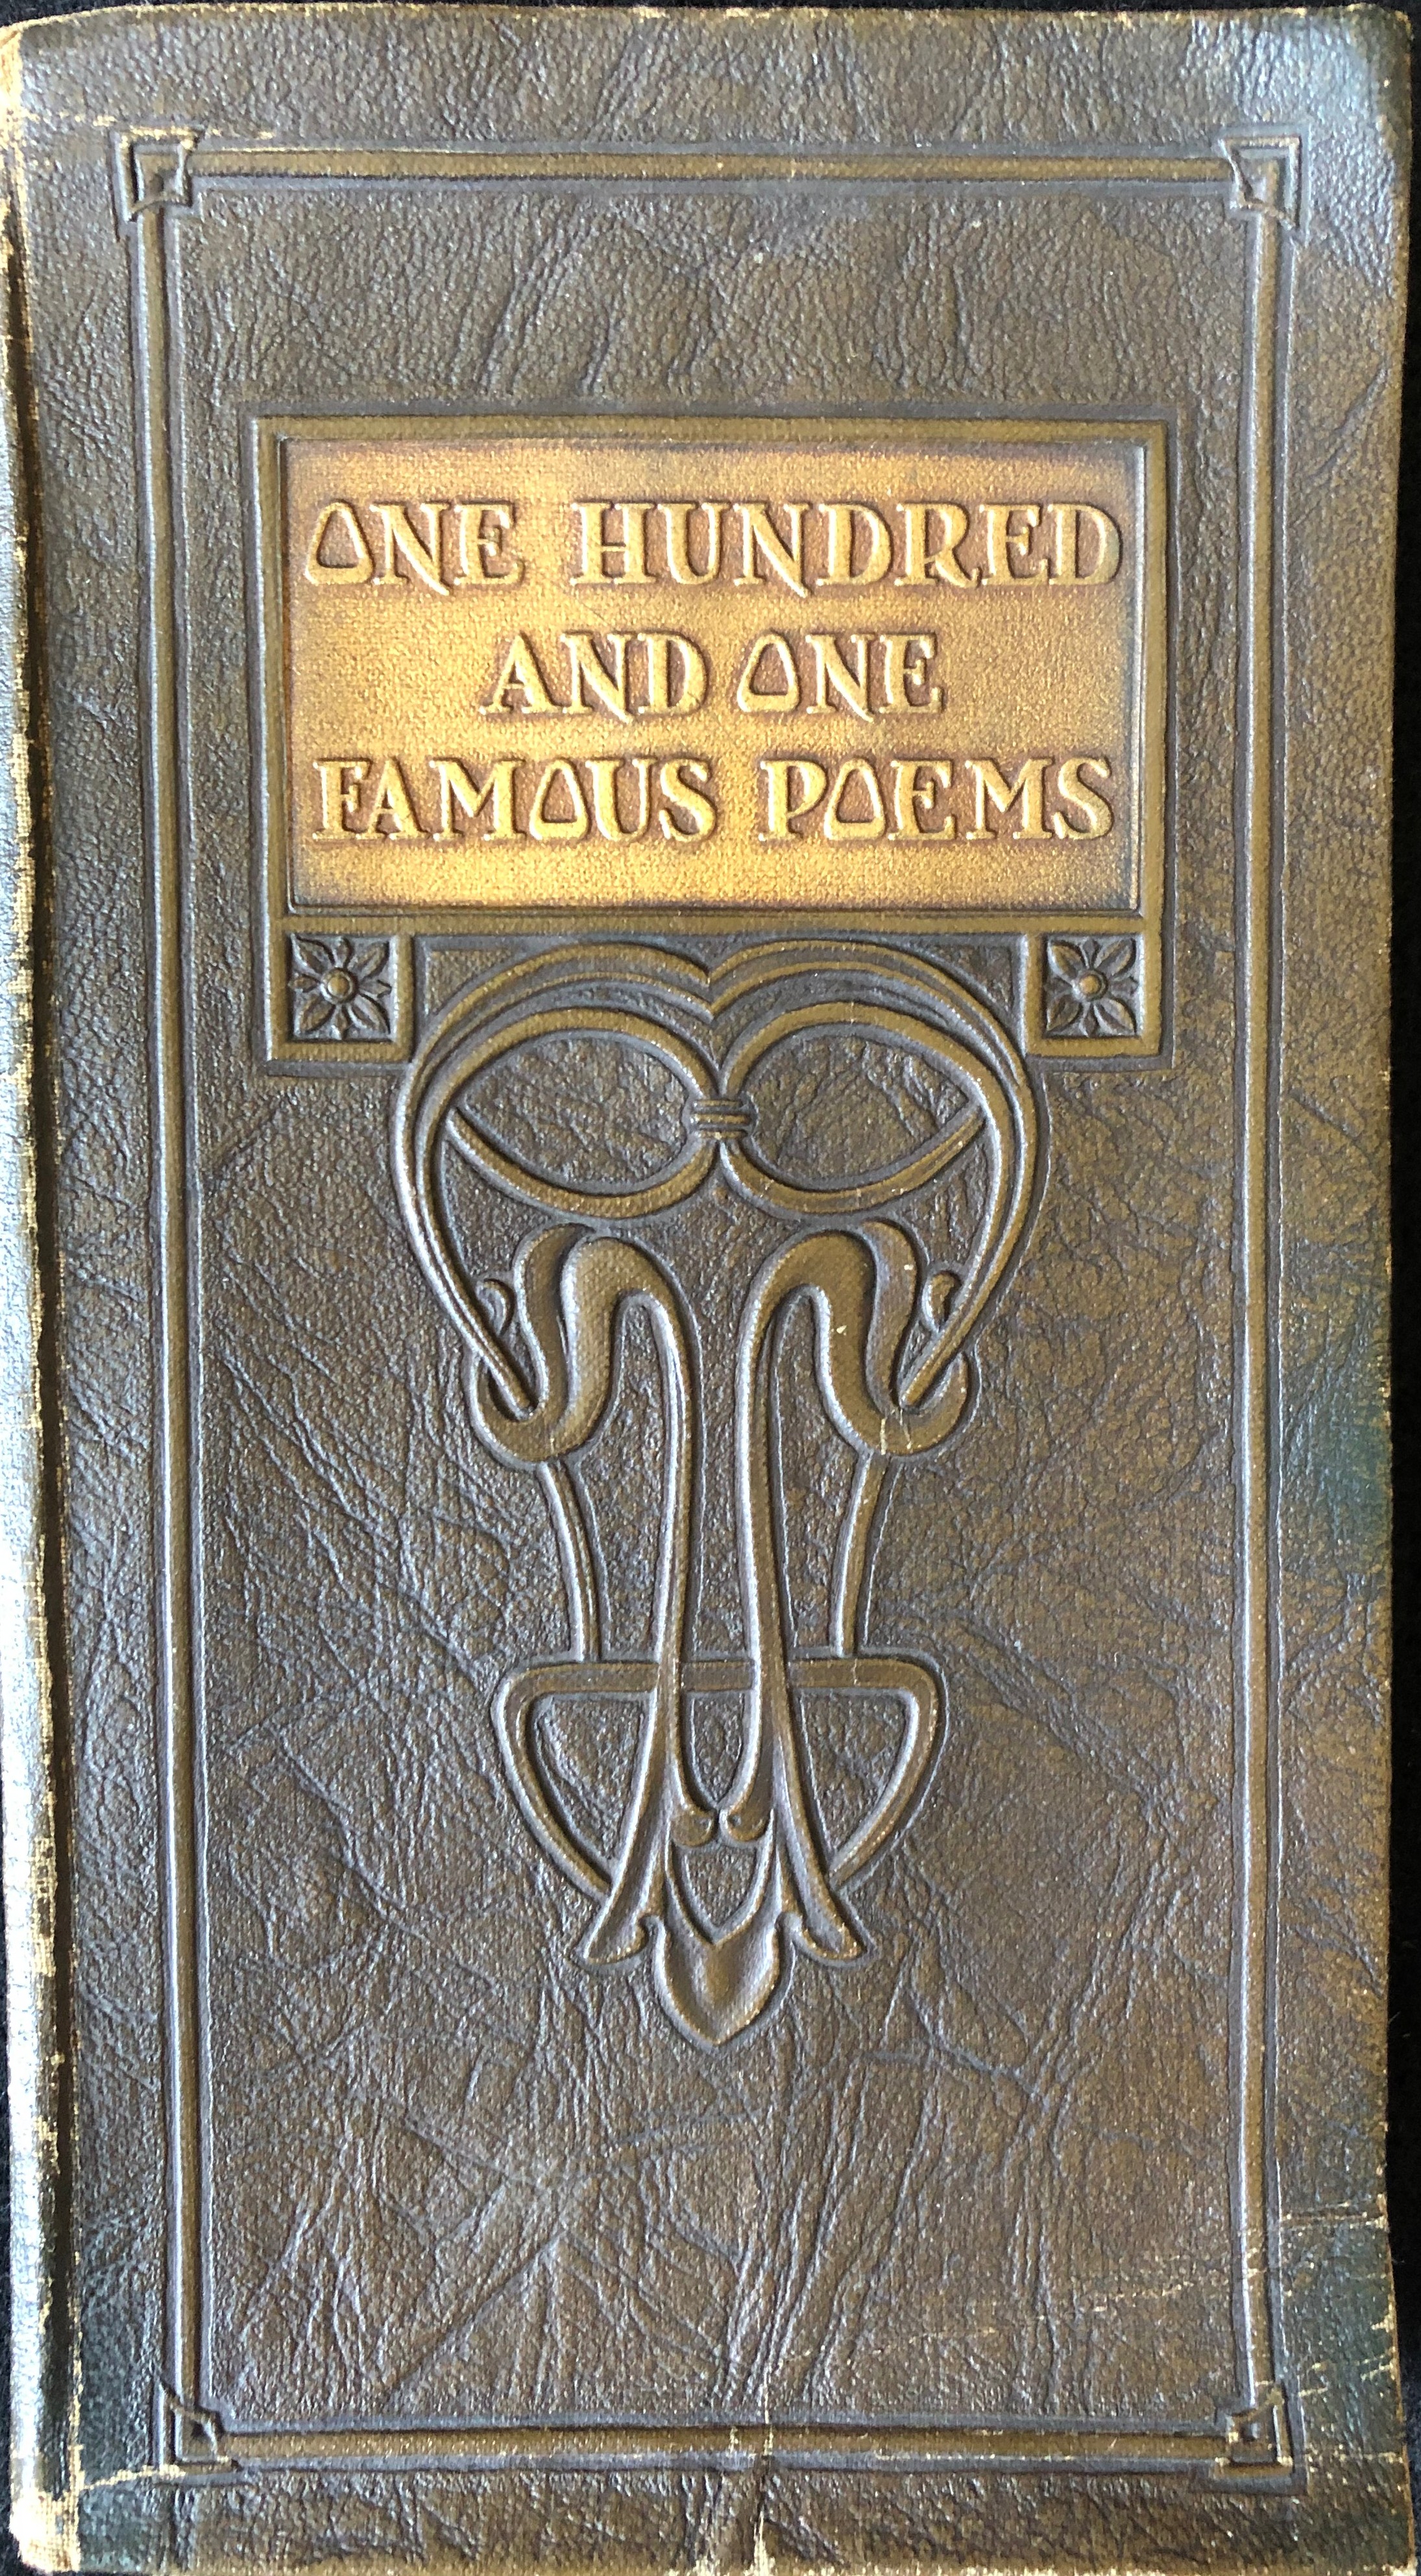 cover art of 101 famous poems